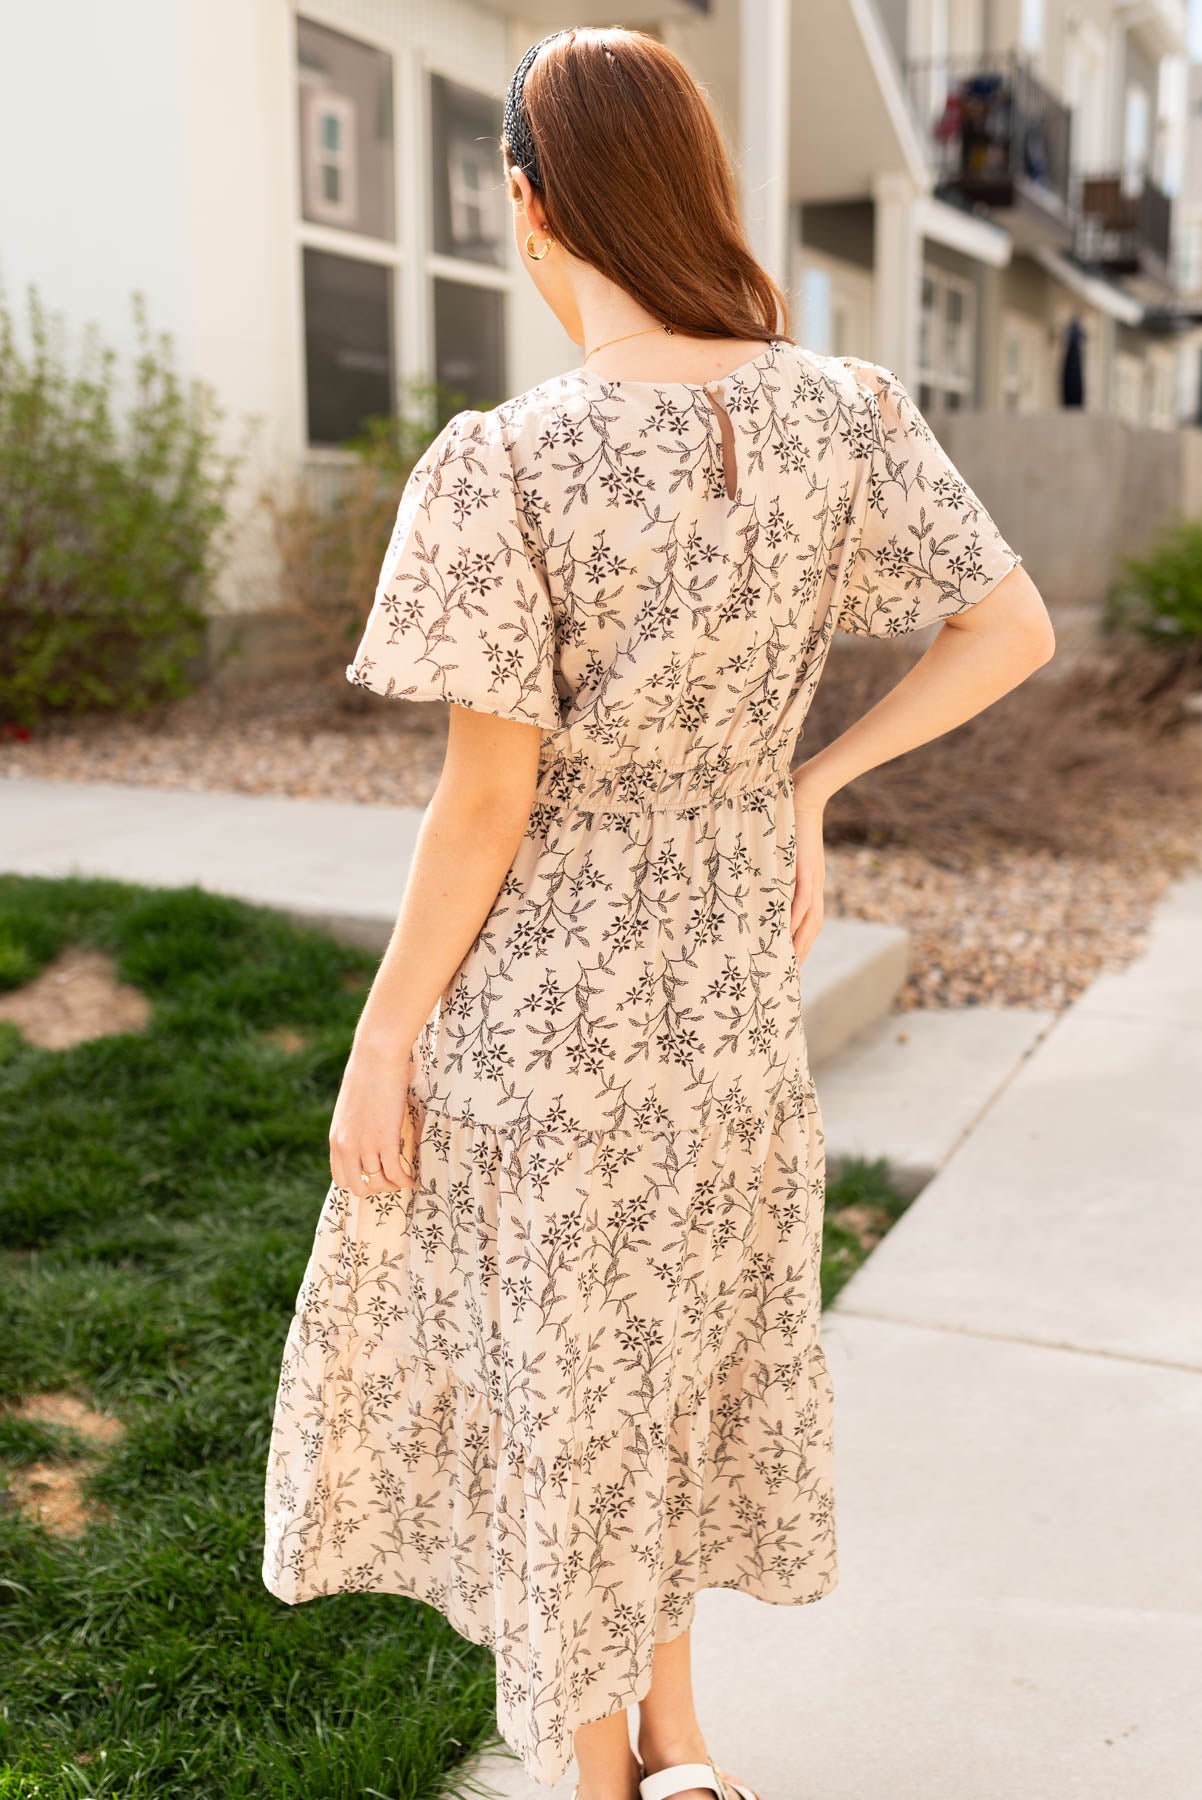 Back view of the taupe patterned dress